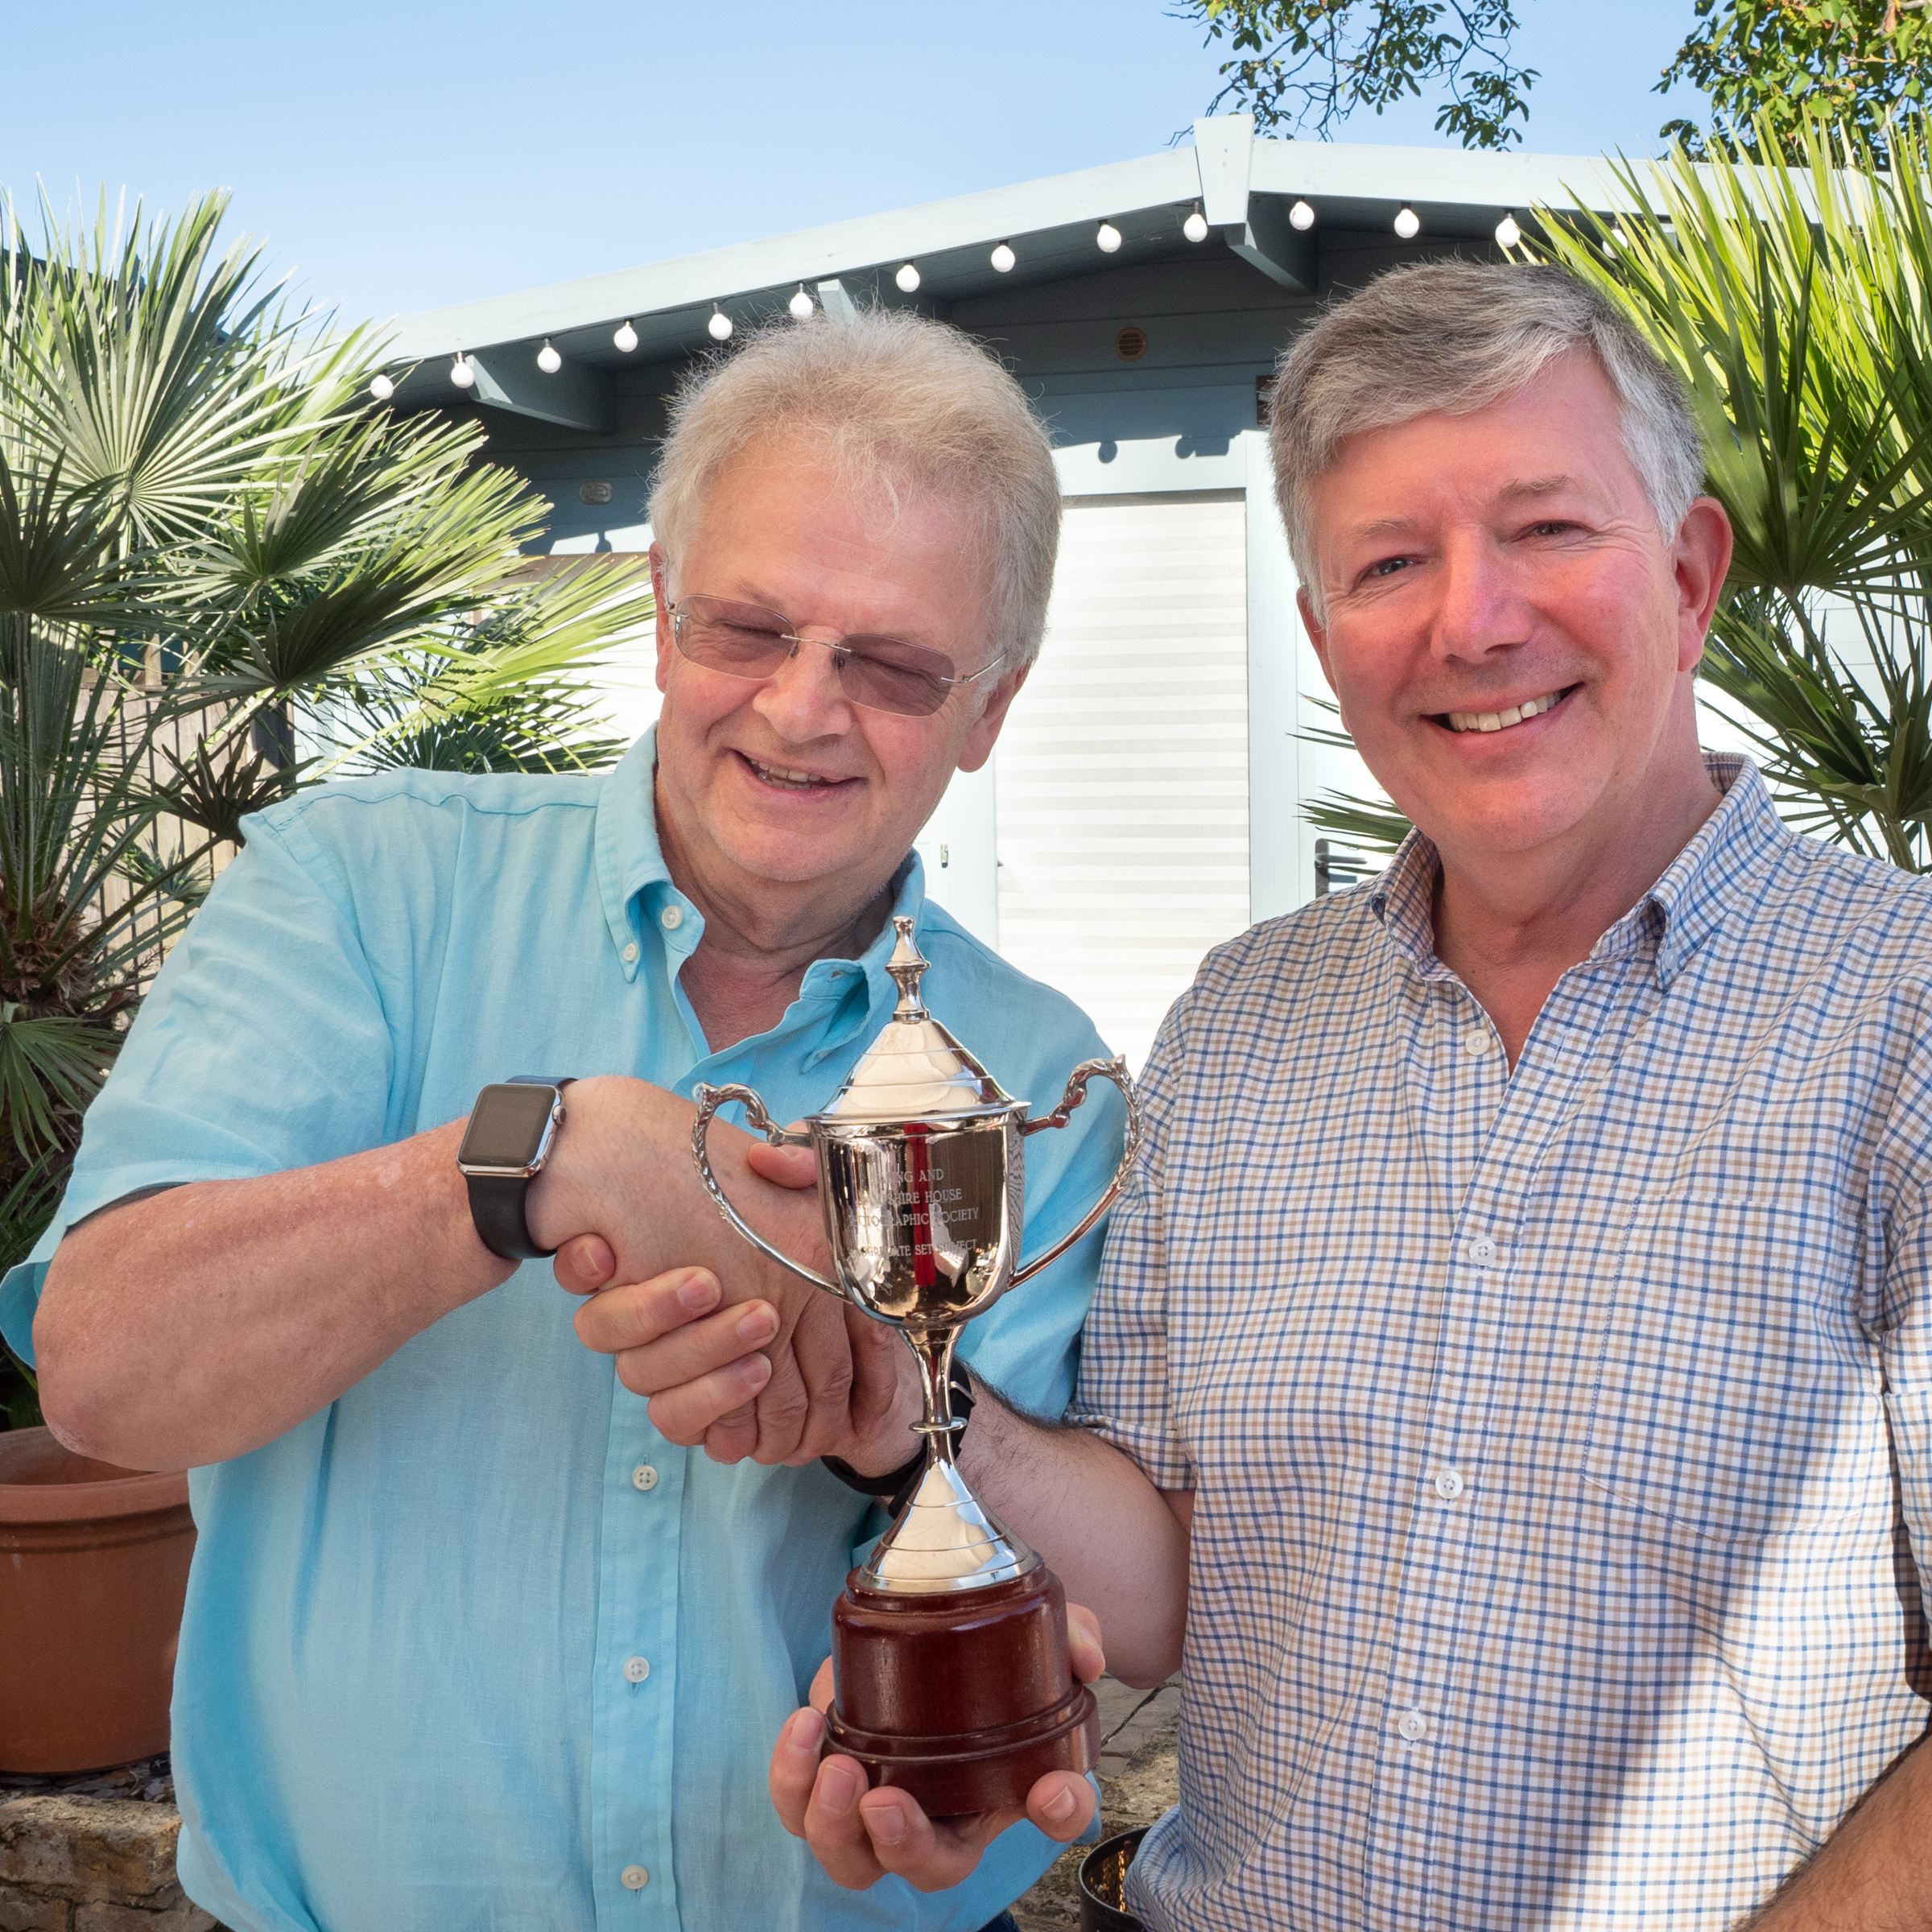 Paul Mason receives his trophy from EHHPS President Phil Dean